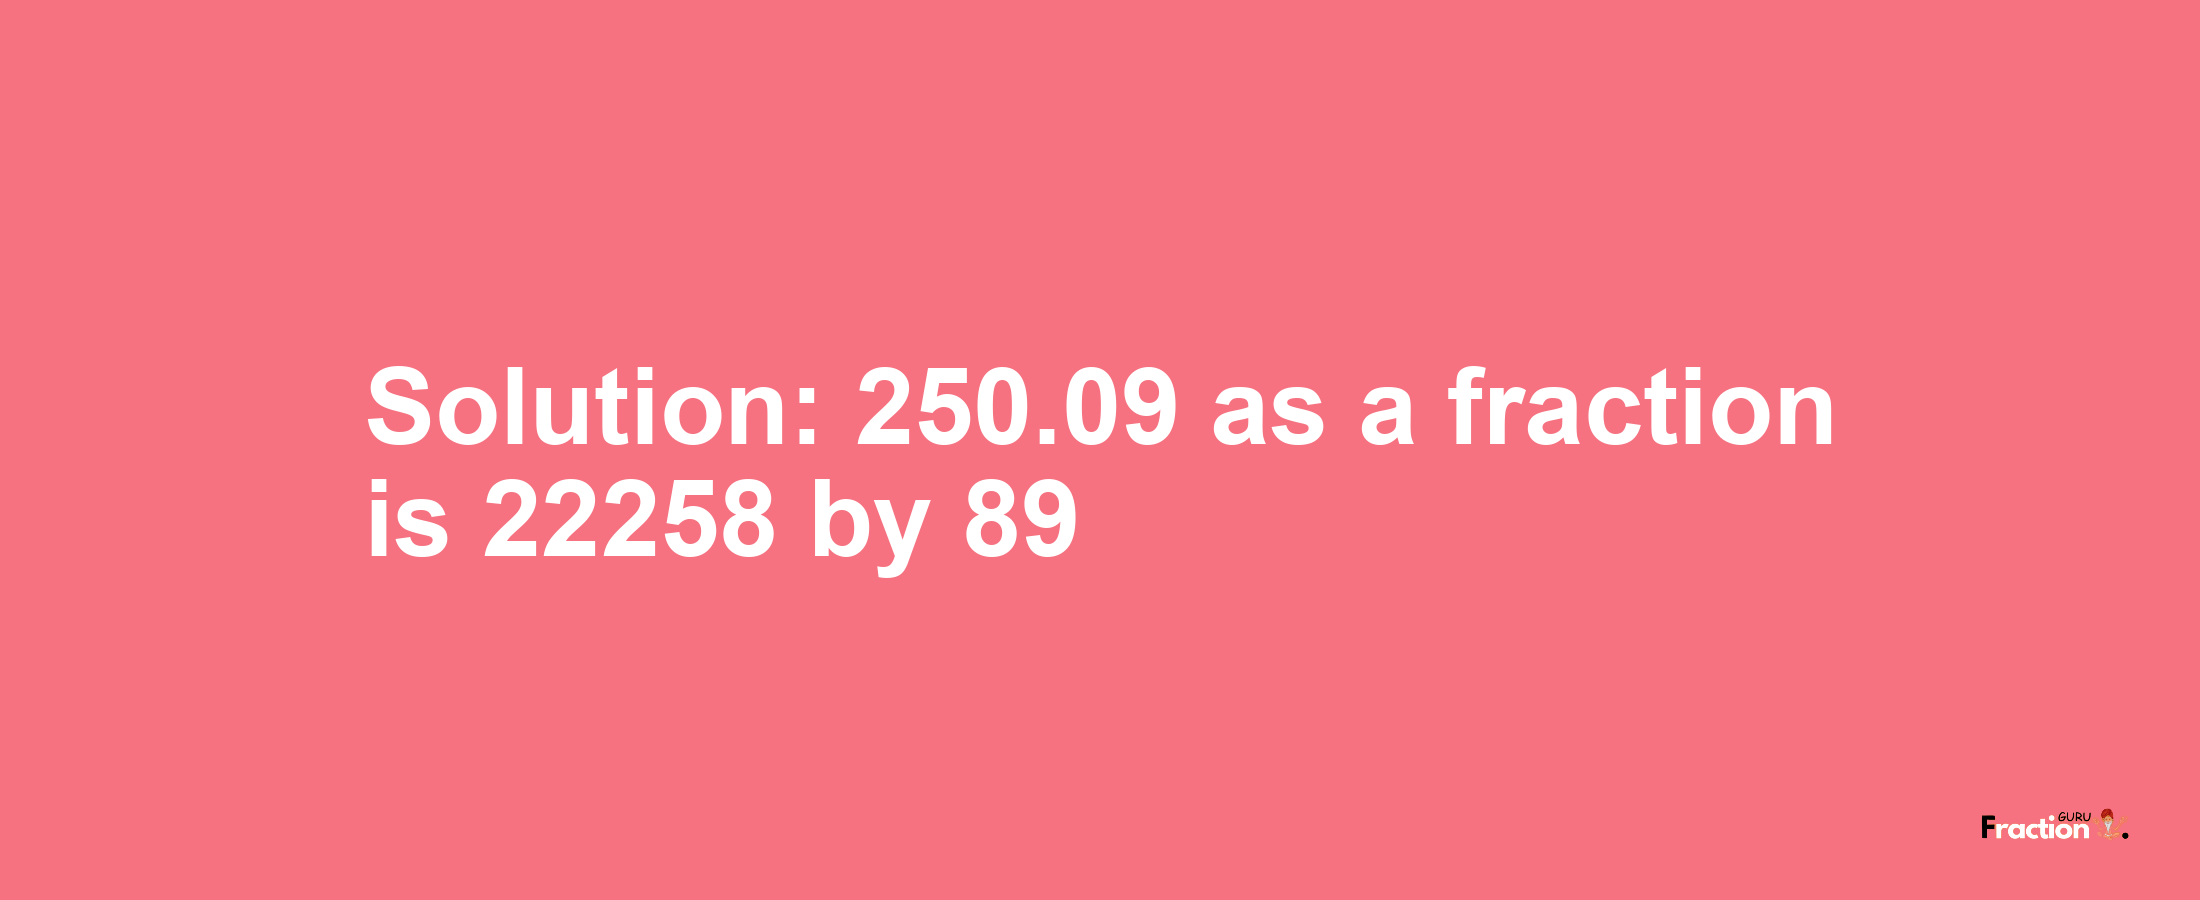 Solution:250.09 as a fraction is 22258/89